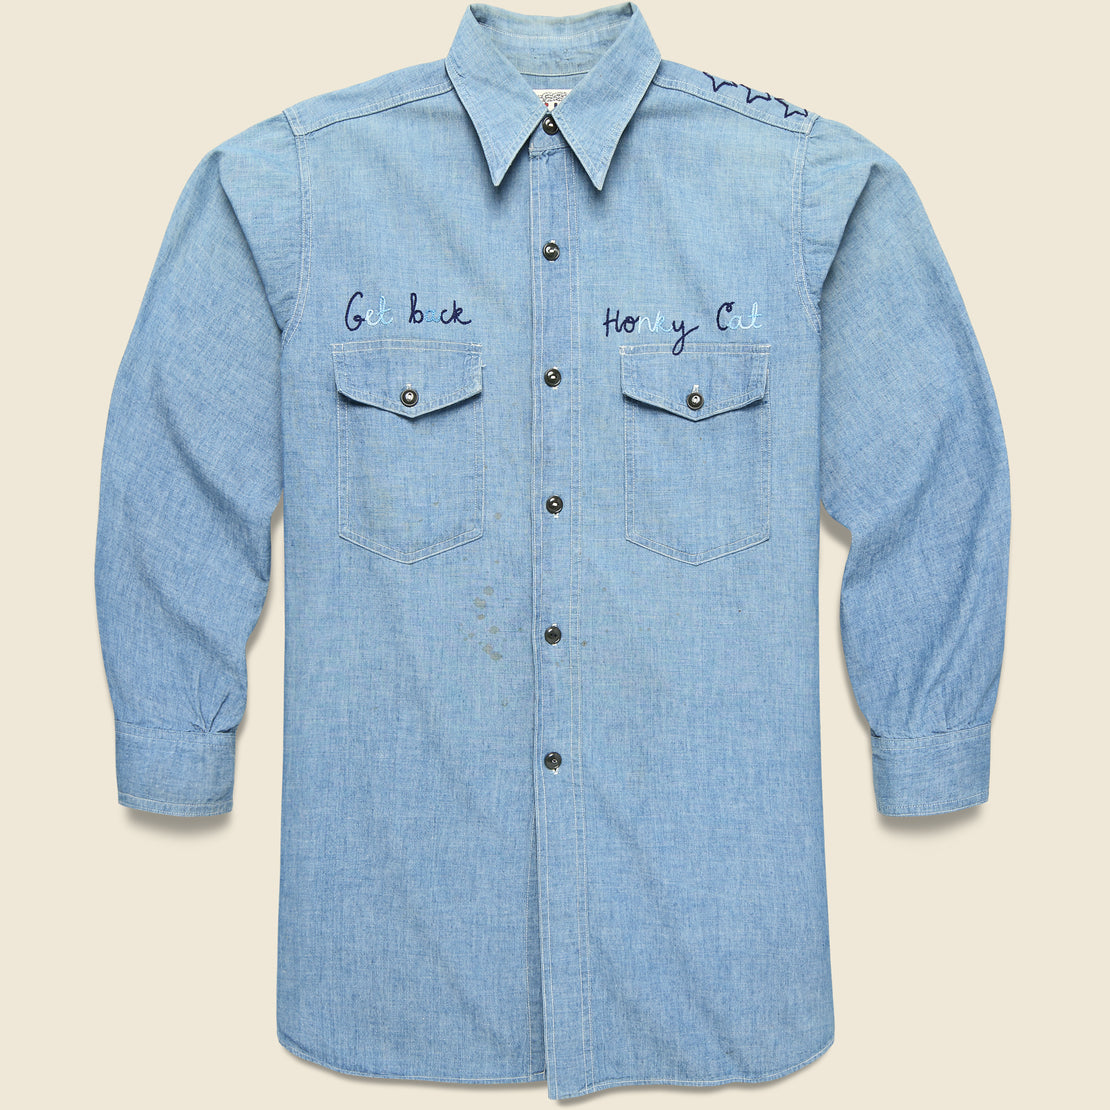 Elton John Honky Cat Shirt - Jolly Knot Club - STAG Provisions - Tops - L/S Woven - Other Pattern